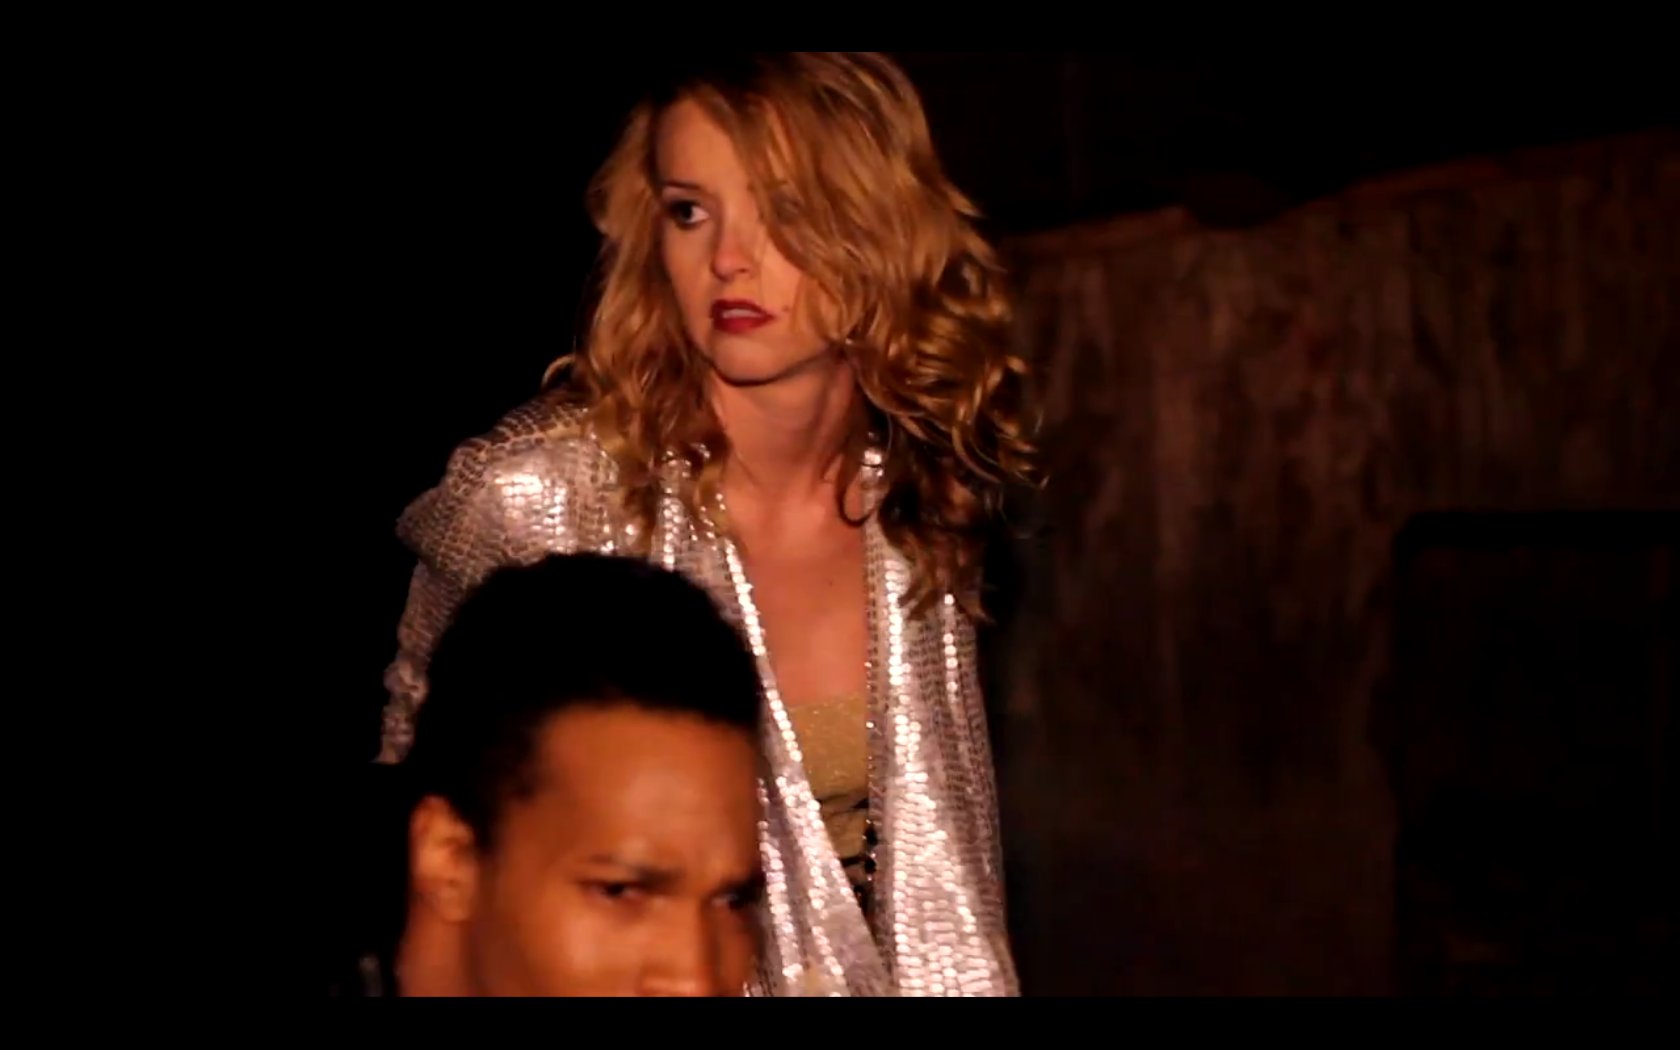 Melanie Camp in Diego Trinidad's music video for Vampire Lifestyle.